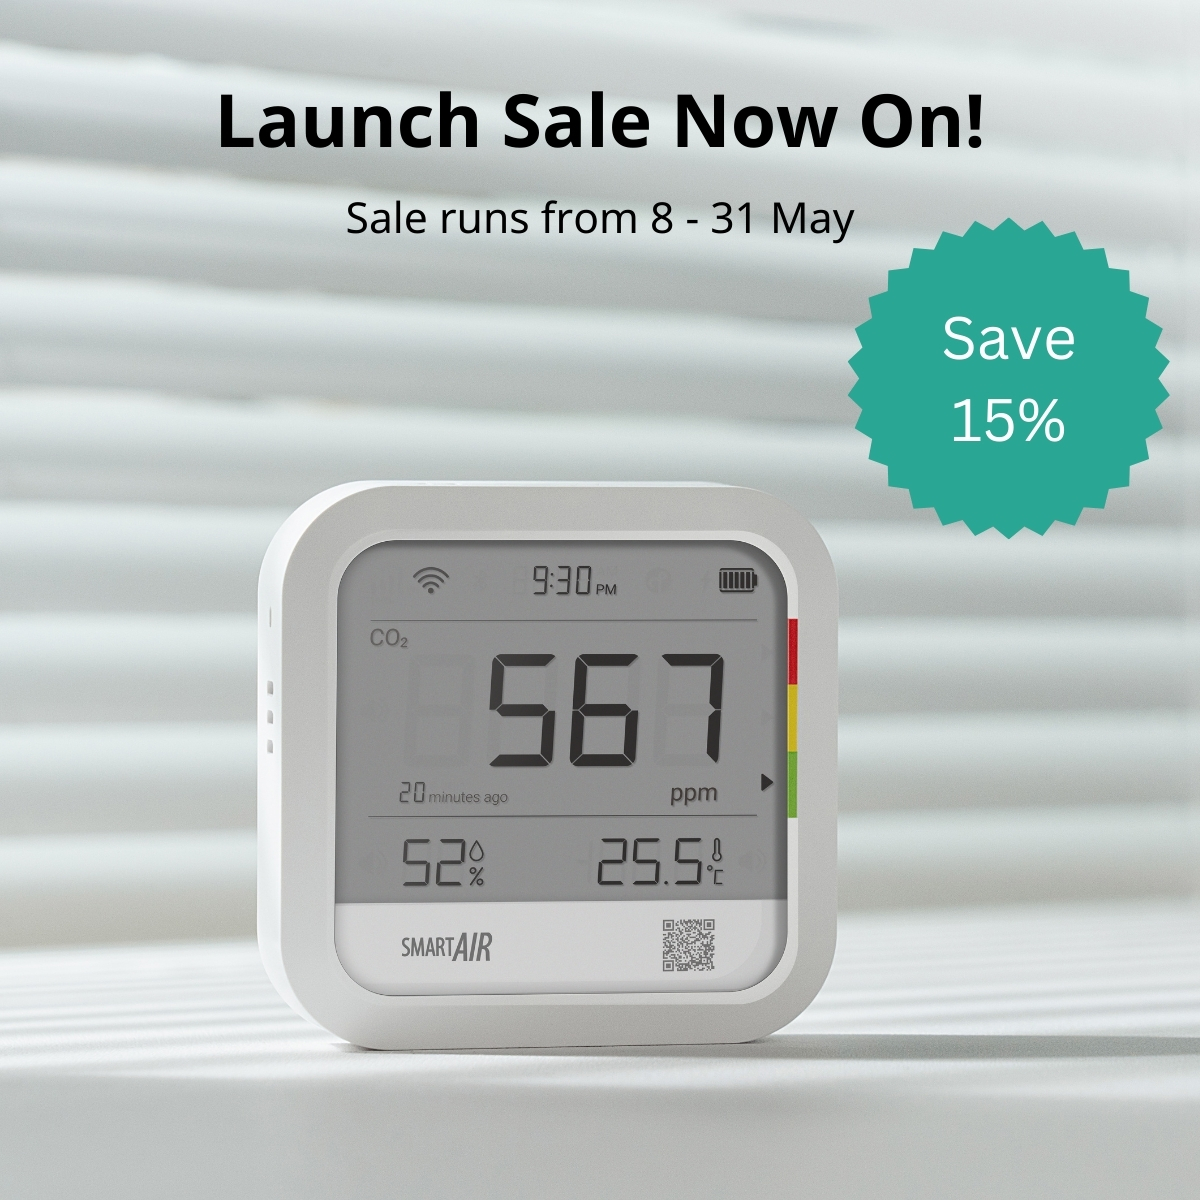 📢 New product time! The CO2 Monitor by Smart Air has made it to Kiwi shores! 🎉 Available now and until the end of May you can take an extra 15% off the already low price! Now just $127.49 with fast, free shipping NZ wide. snapair.co.nz/products/smart…